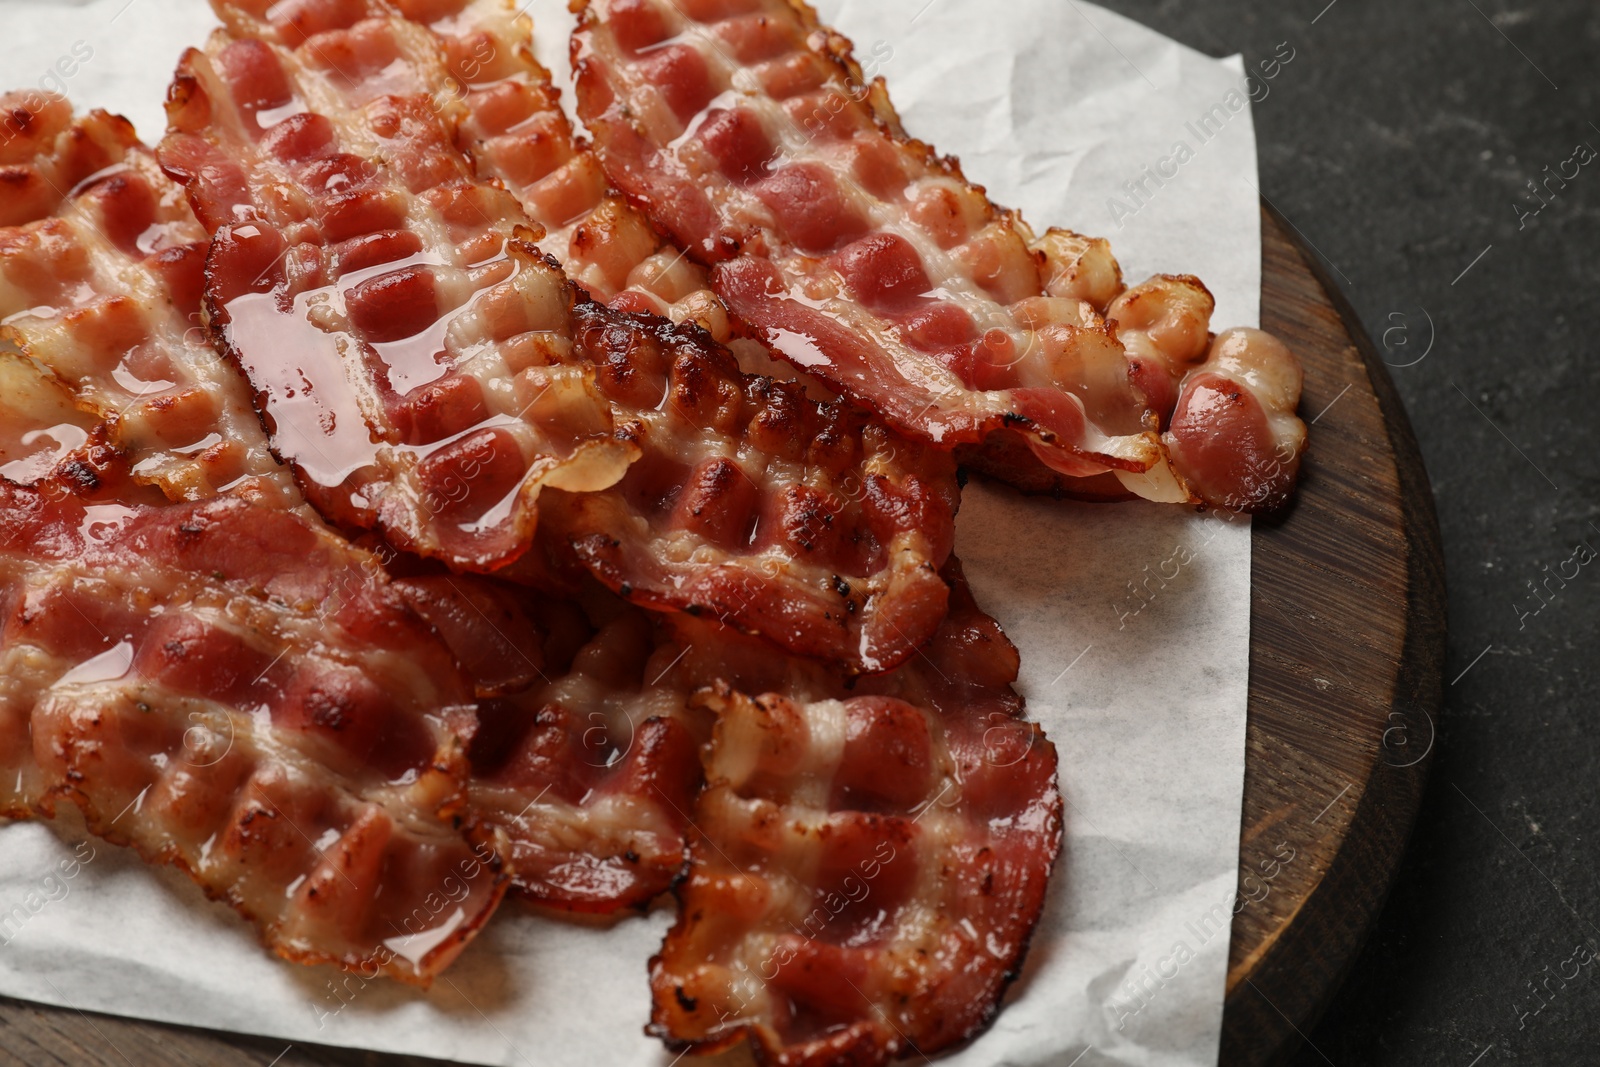 Photo of Board with fried bacon slices on dark table, closeup